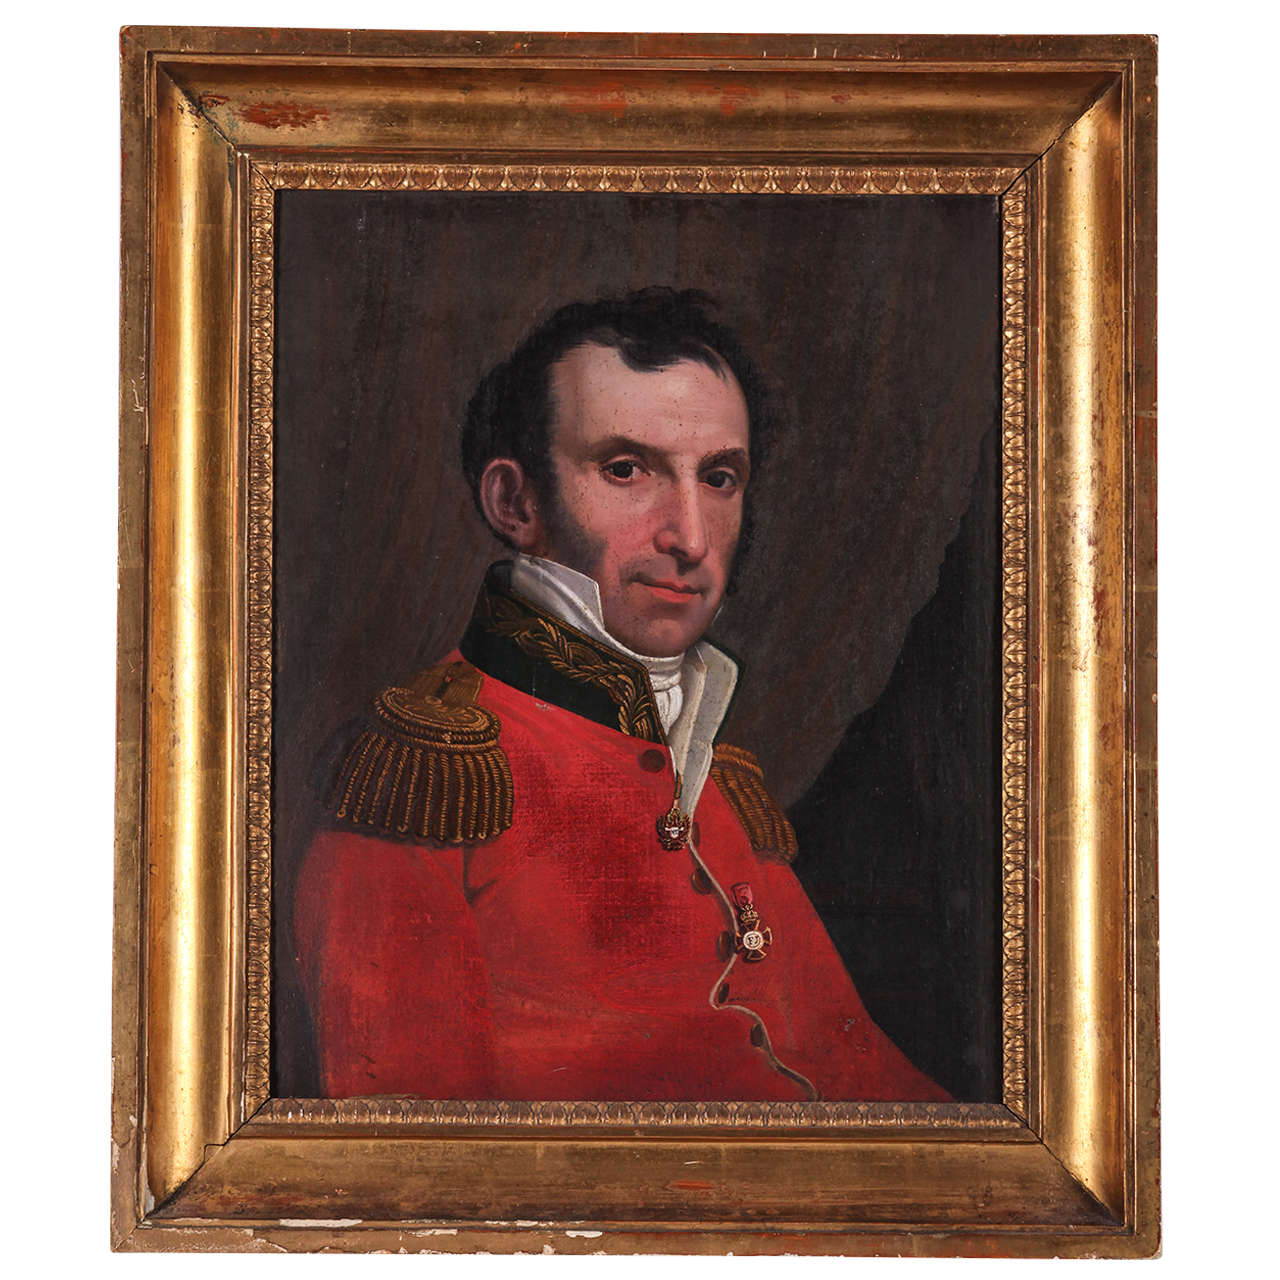 British painter, Portrait of British soldier, oil on canvas, early 19th Century